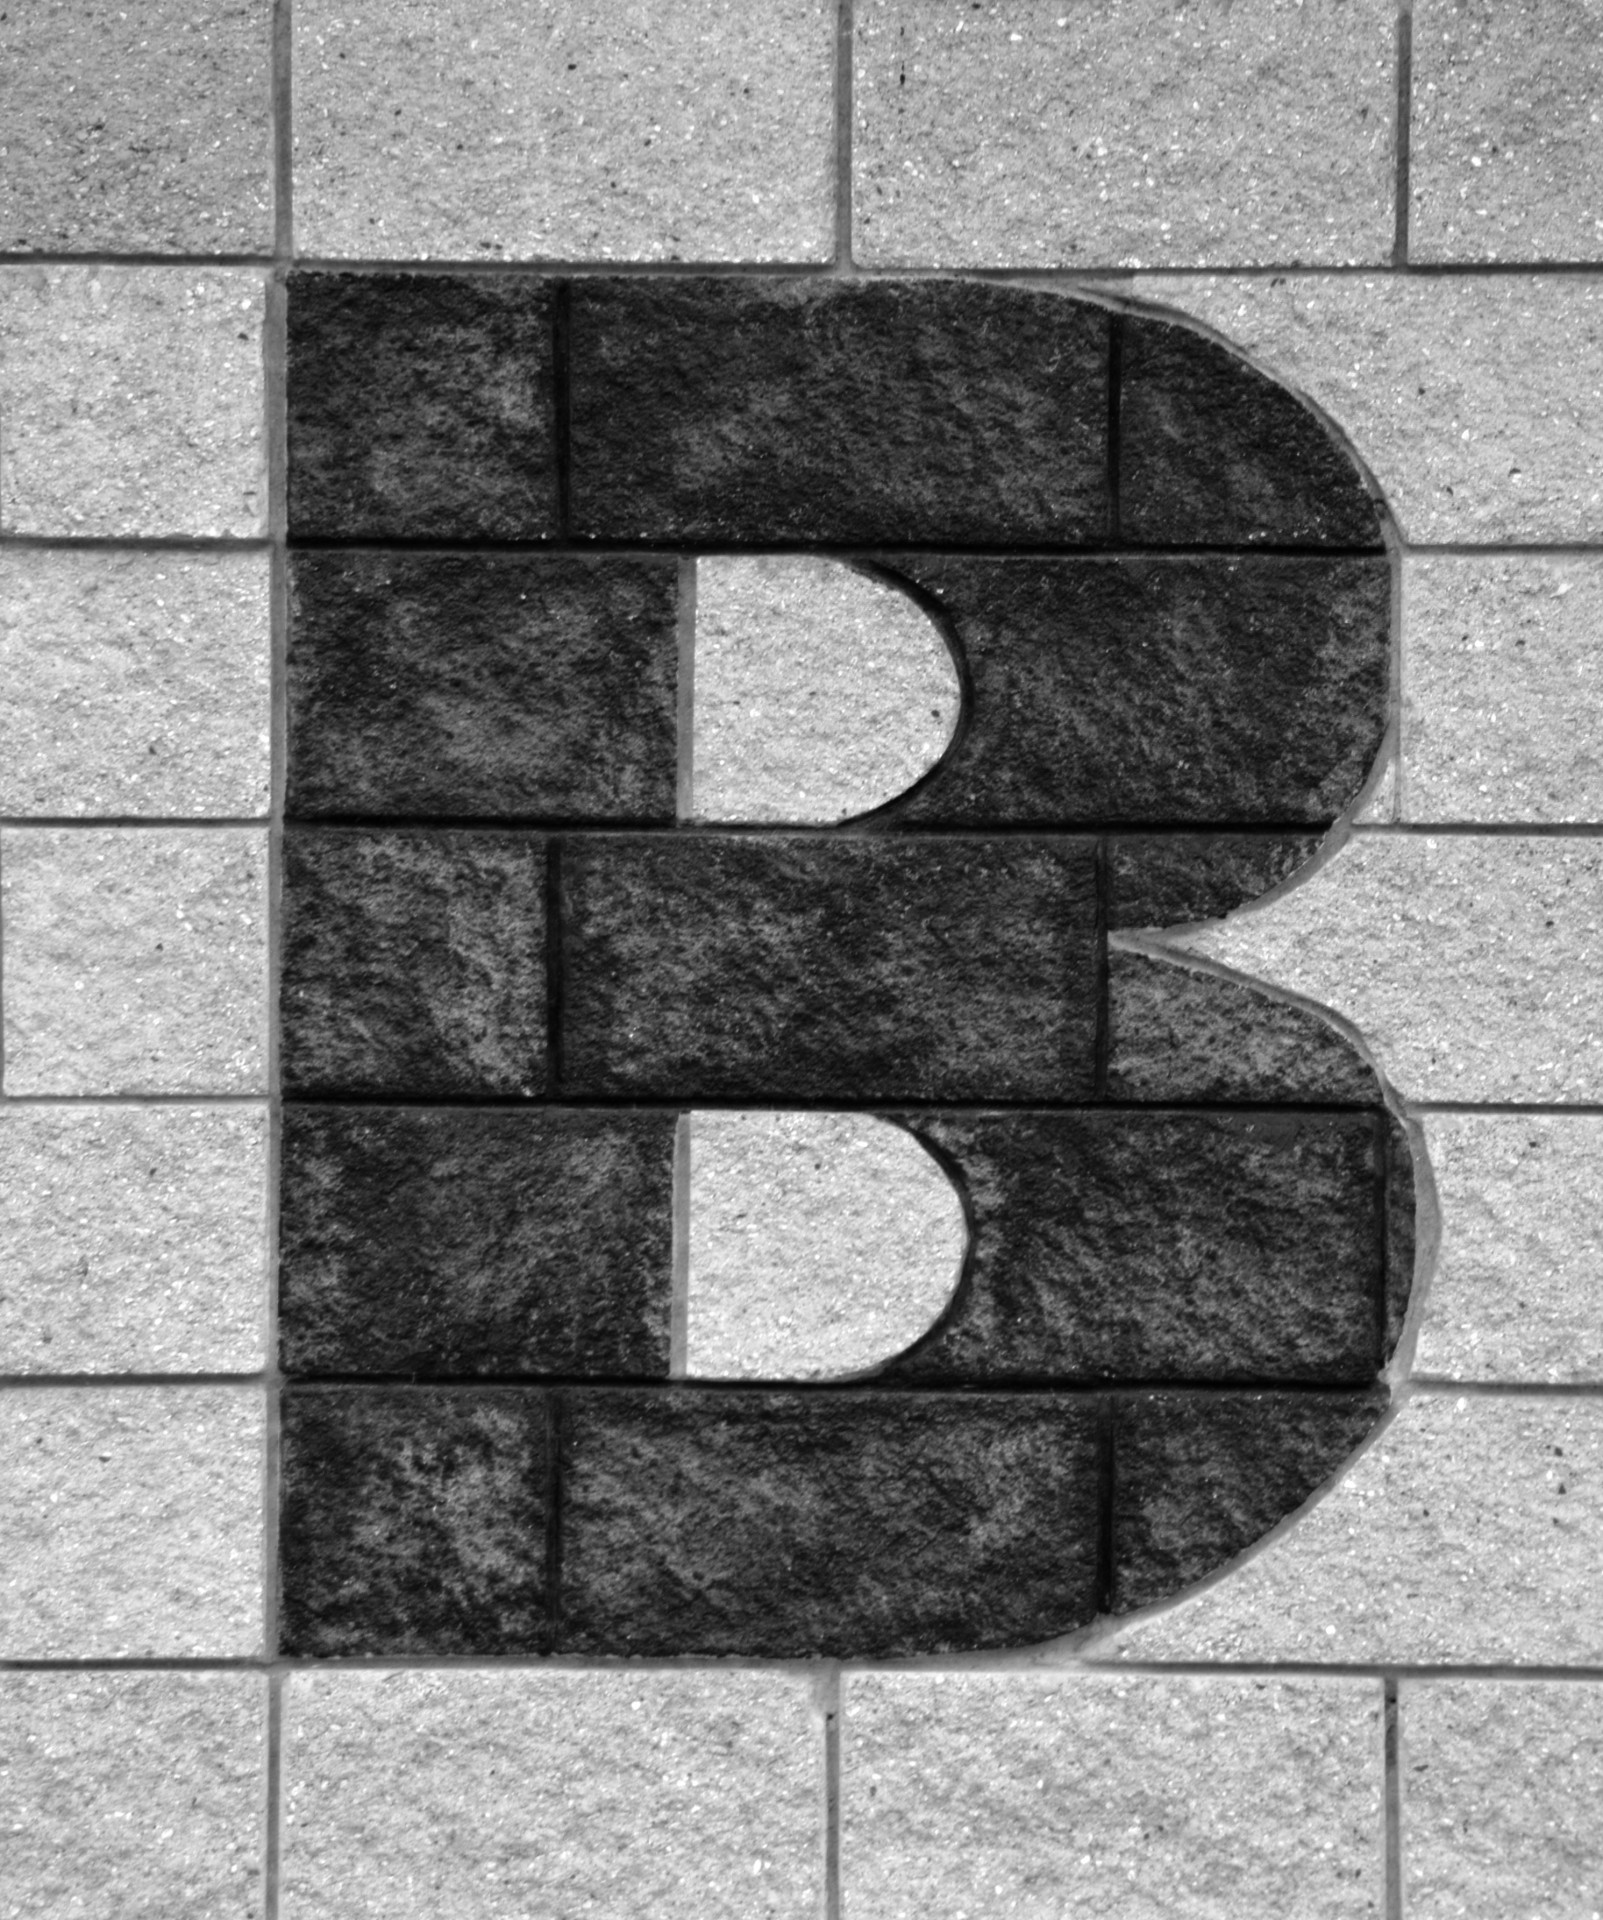 Letter B on brick wall of building exterior